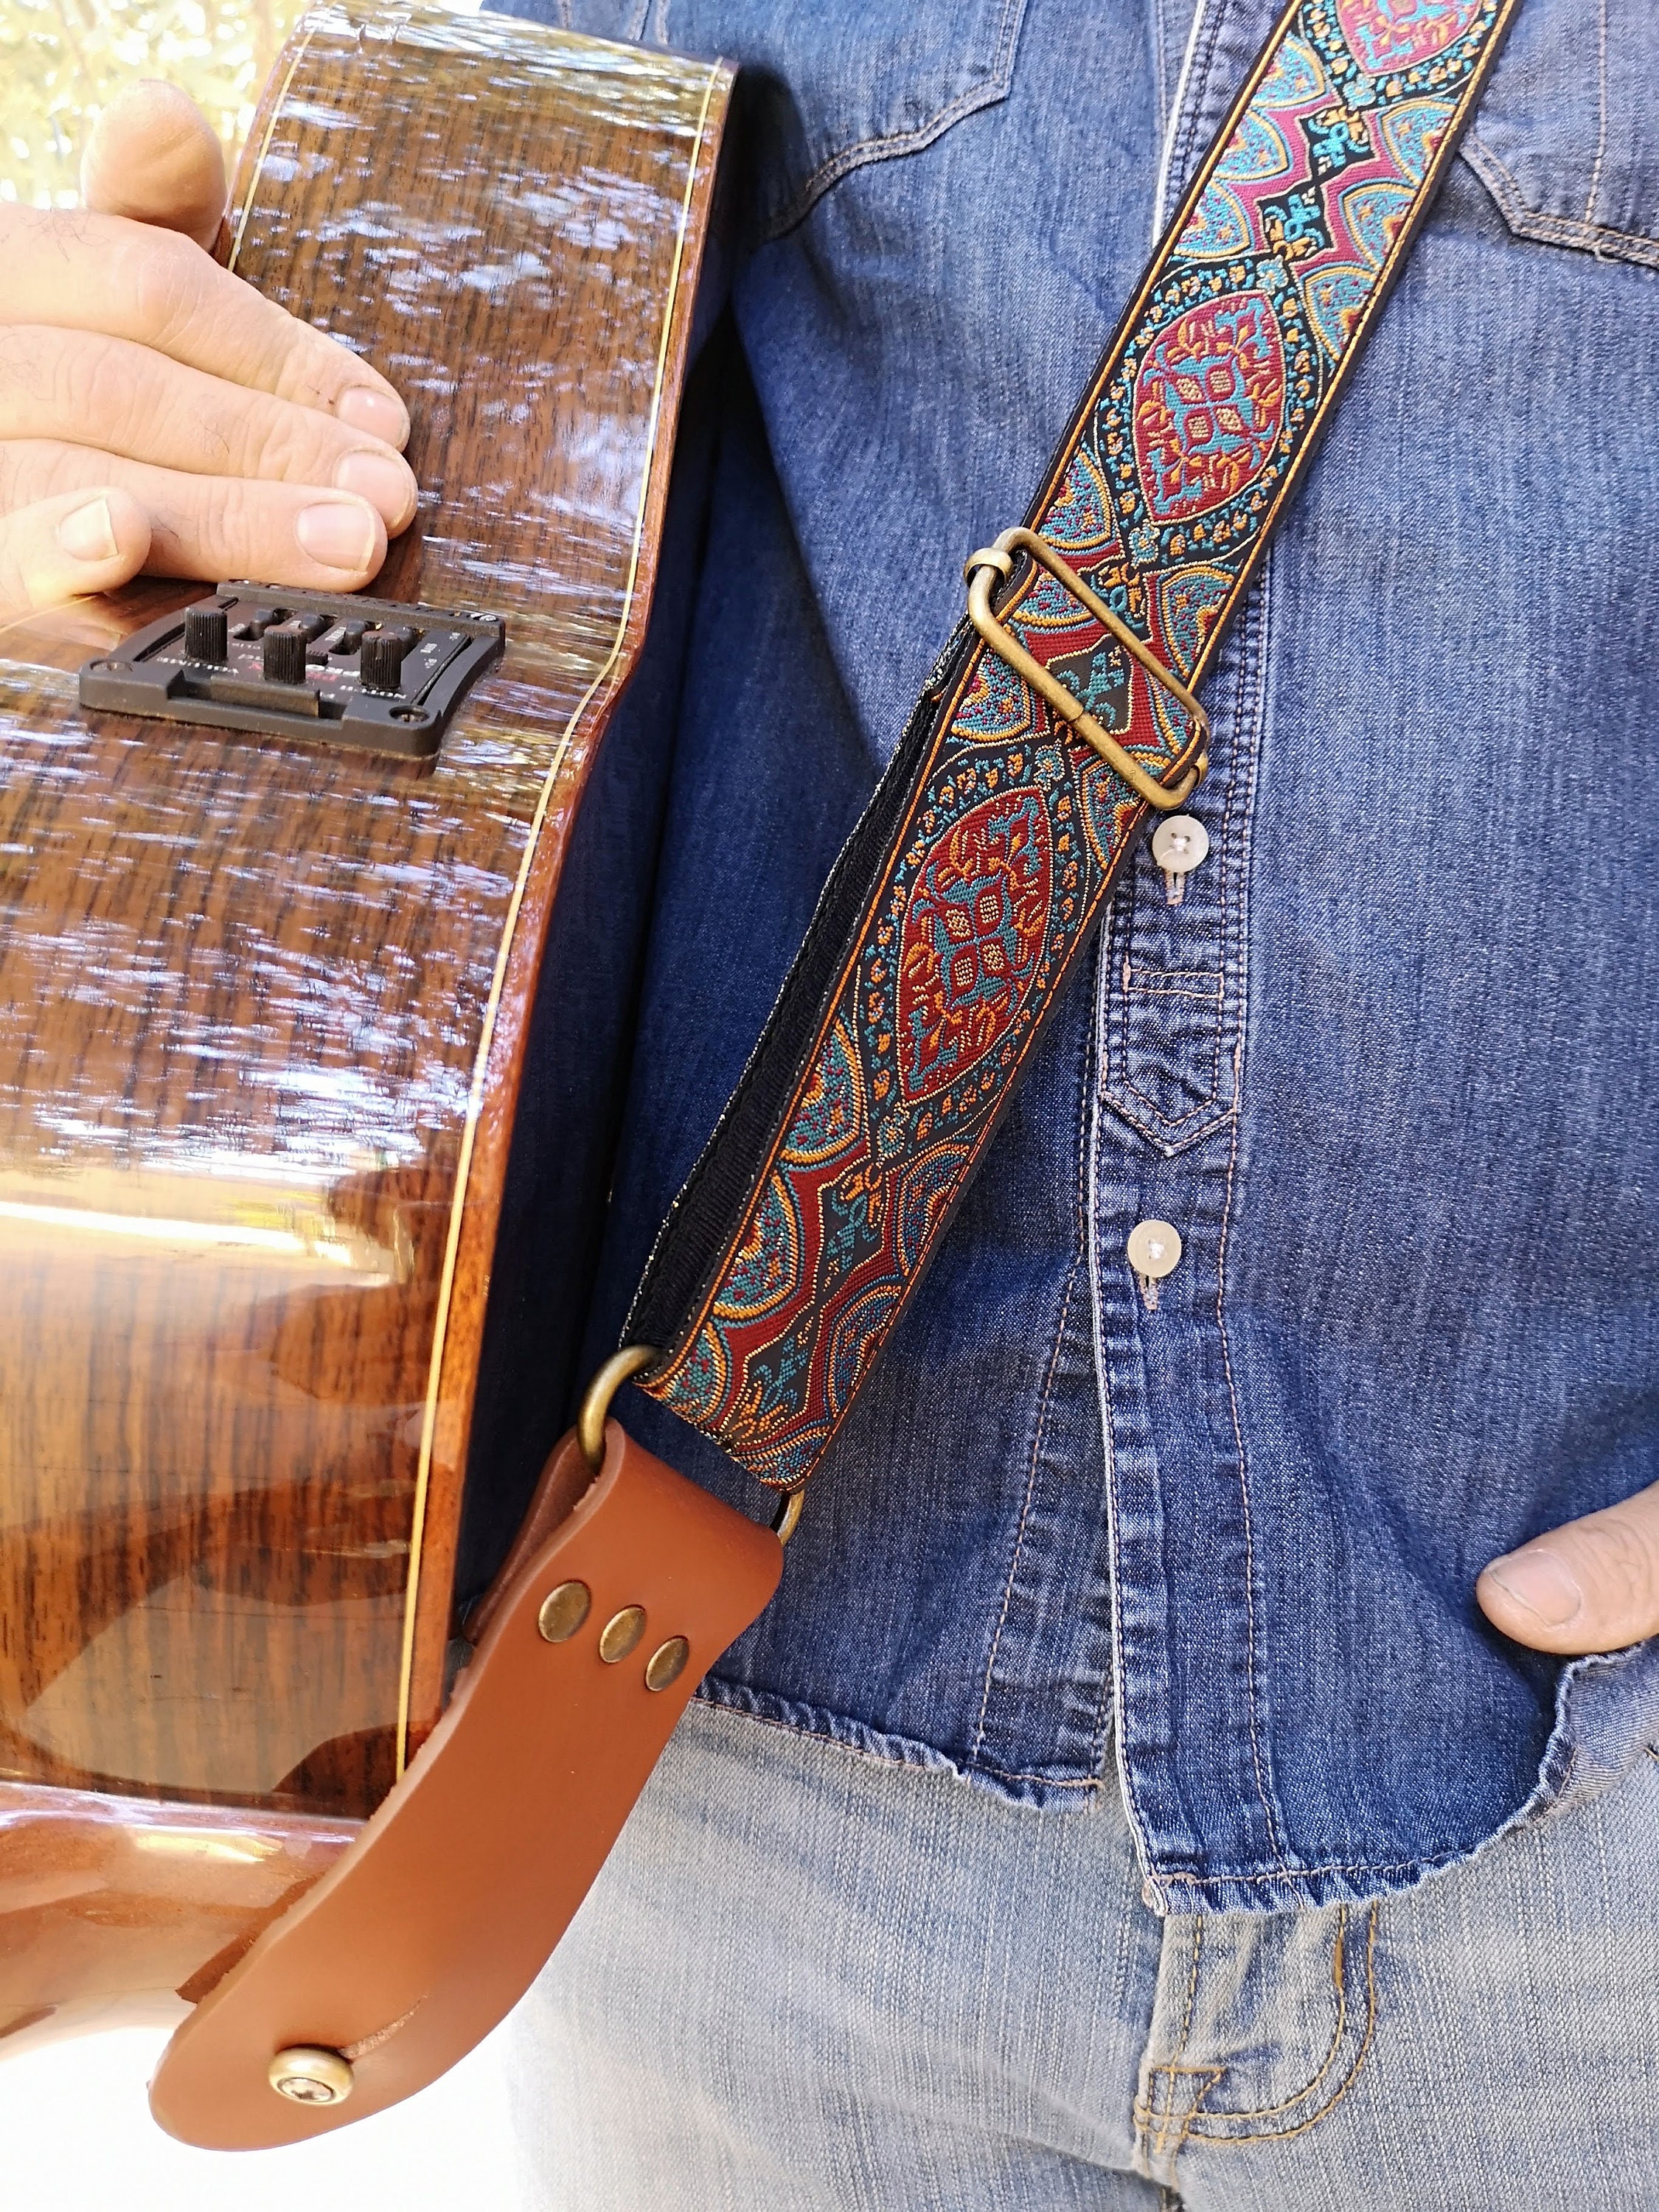 Guitar Strap, Guitar Strap in Vintage and Folk Style, Mythical